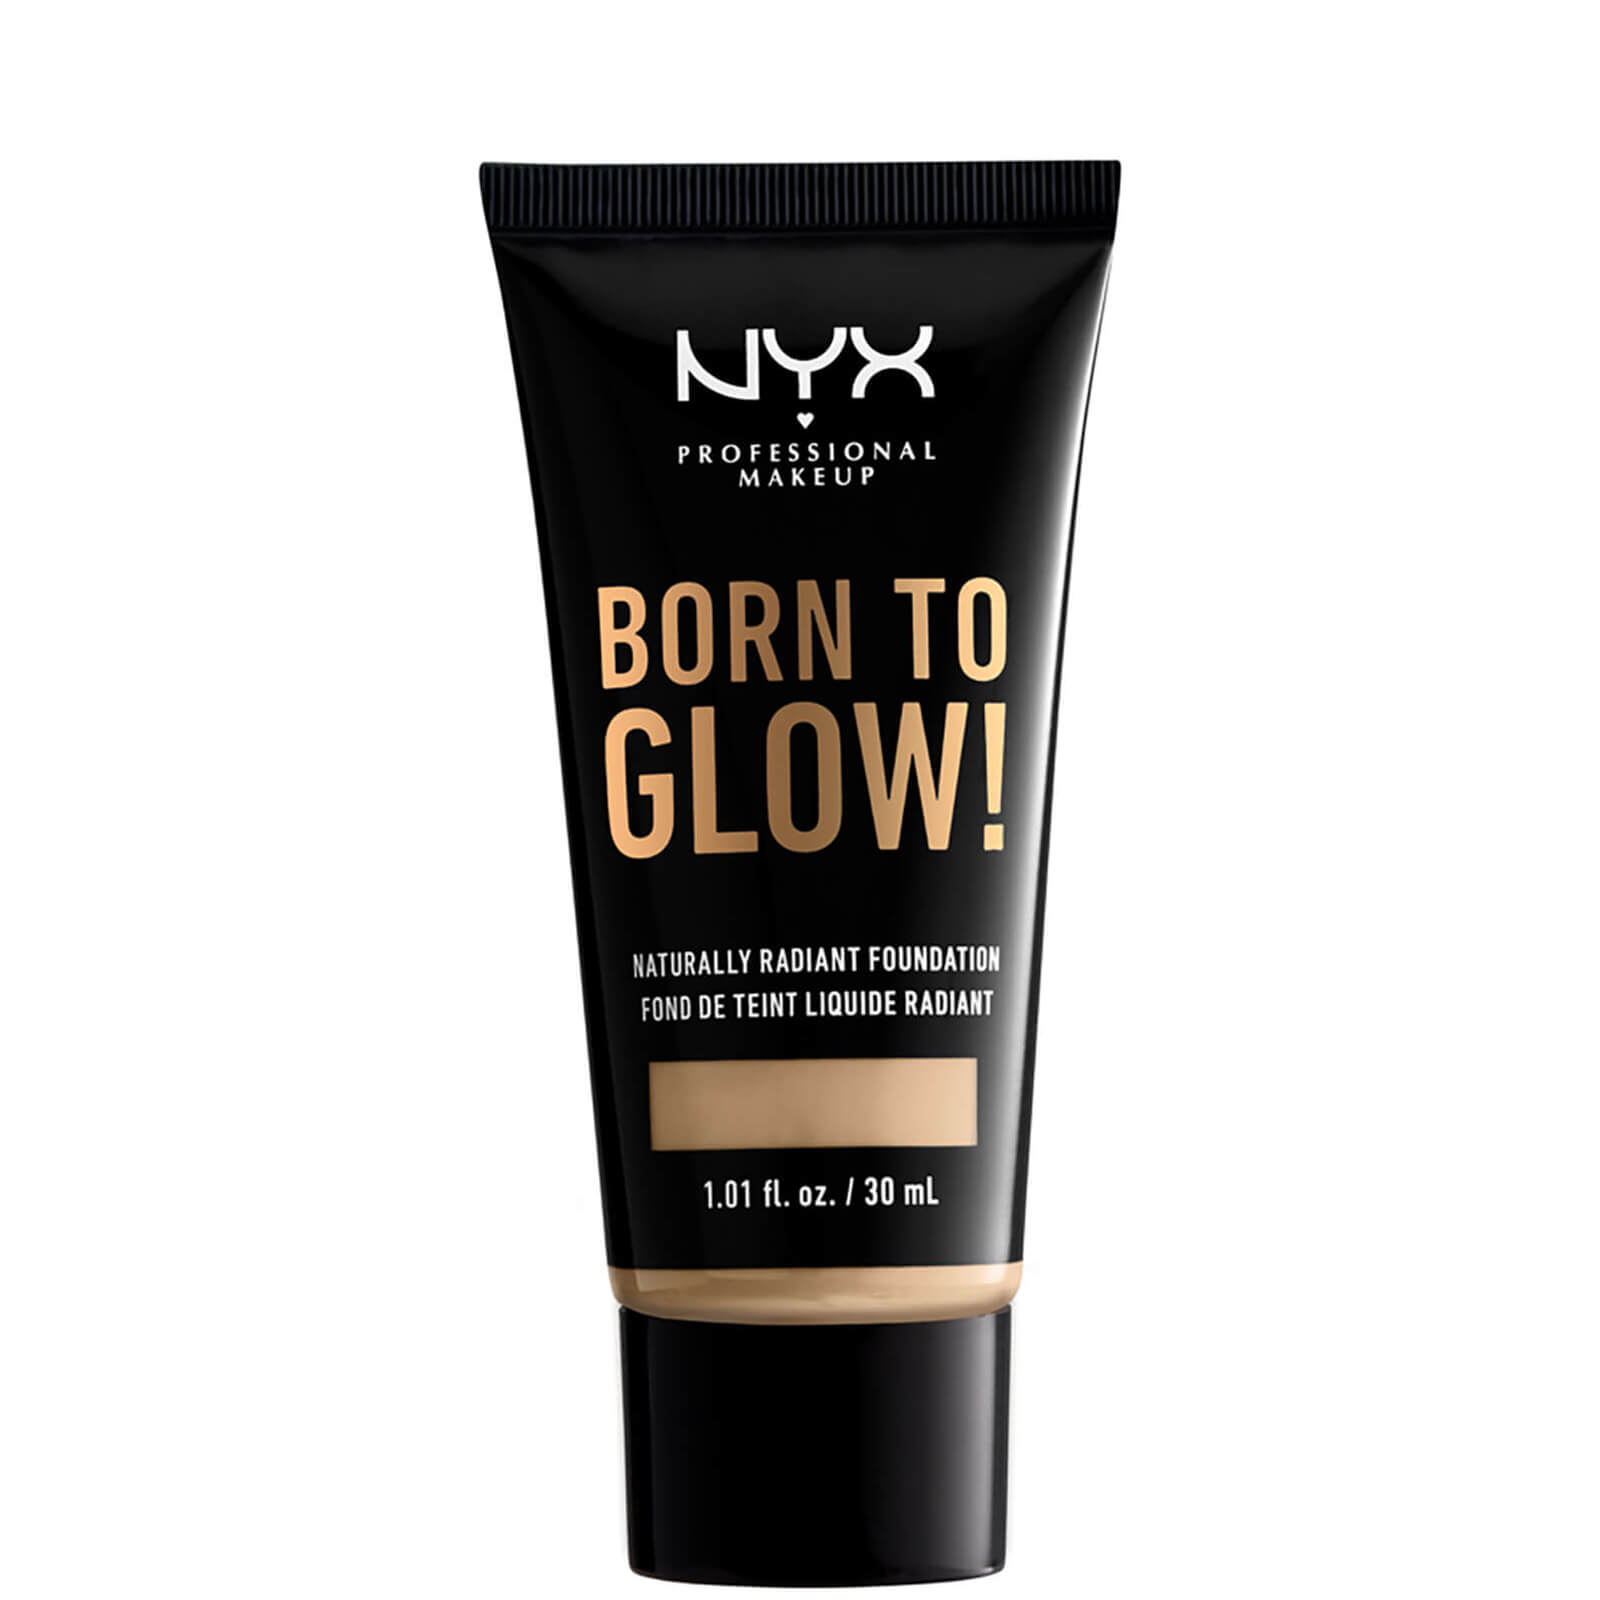 NYX Professional Makeup Born to Glow Naturally Radiant Foundation 30ml (Various Shades) - Nude